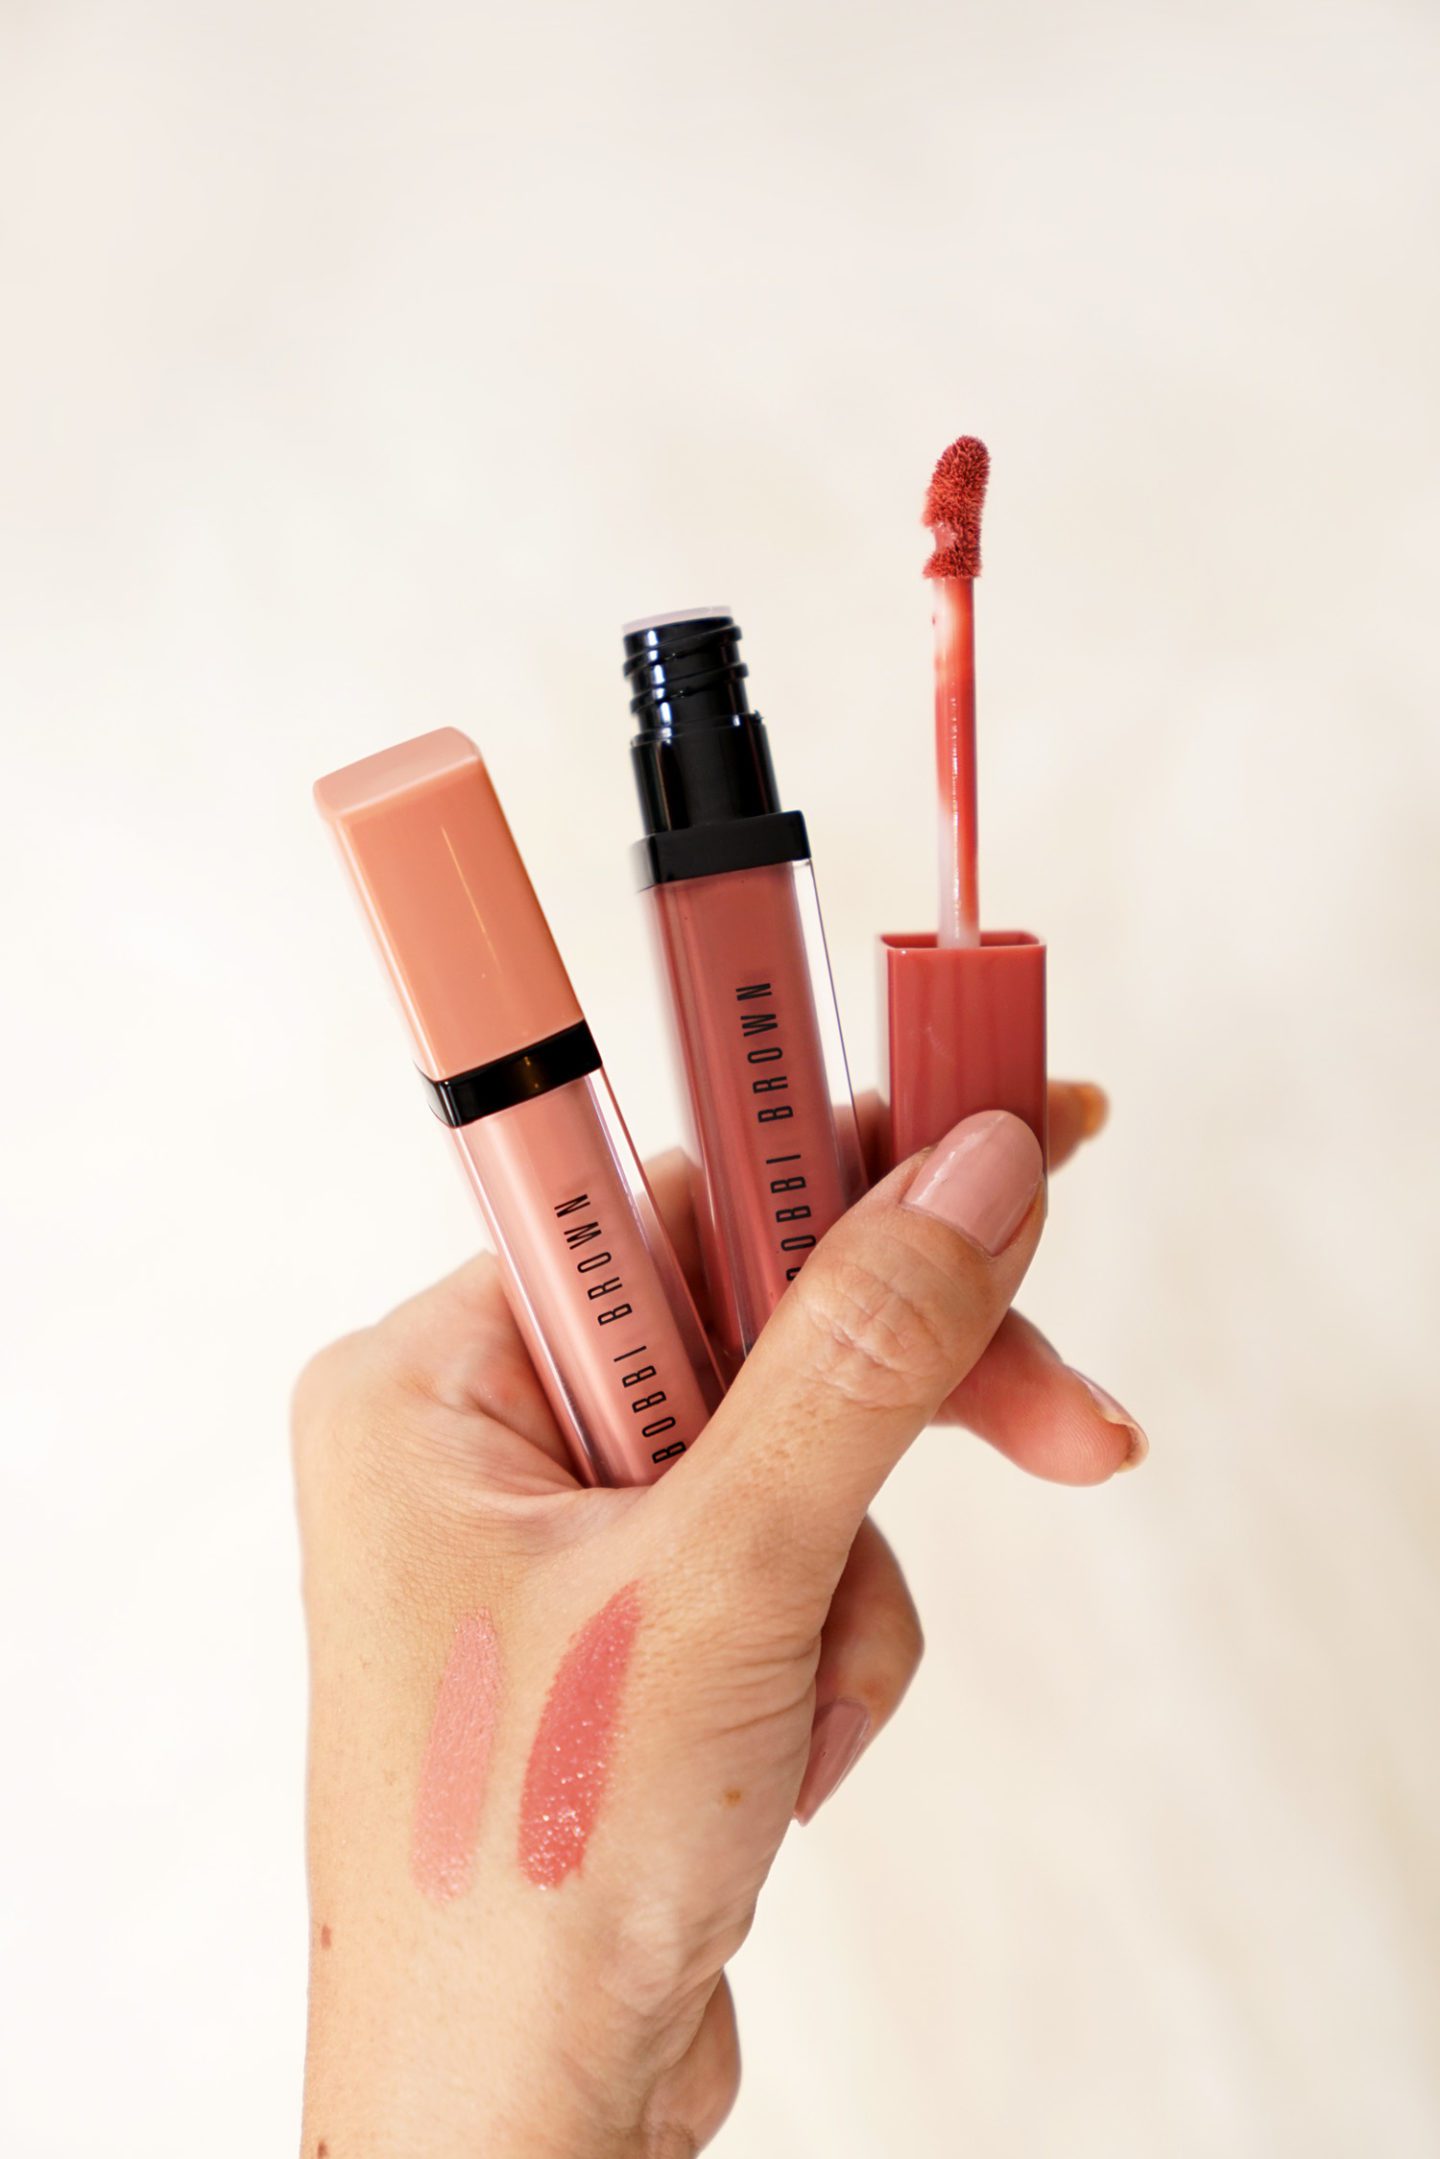 Bobbi Brown Crushed Liquid Lip Balm Review and Lychee Baby and Juicy Date | The Beauty Look Book